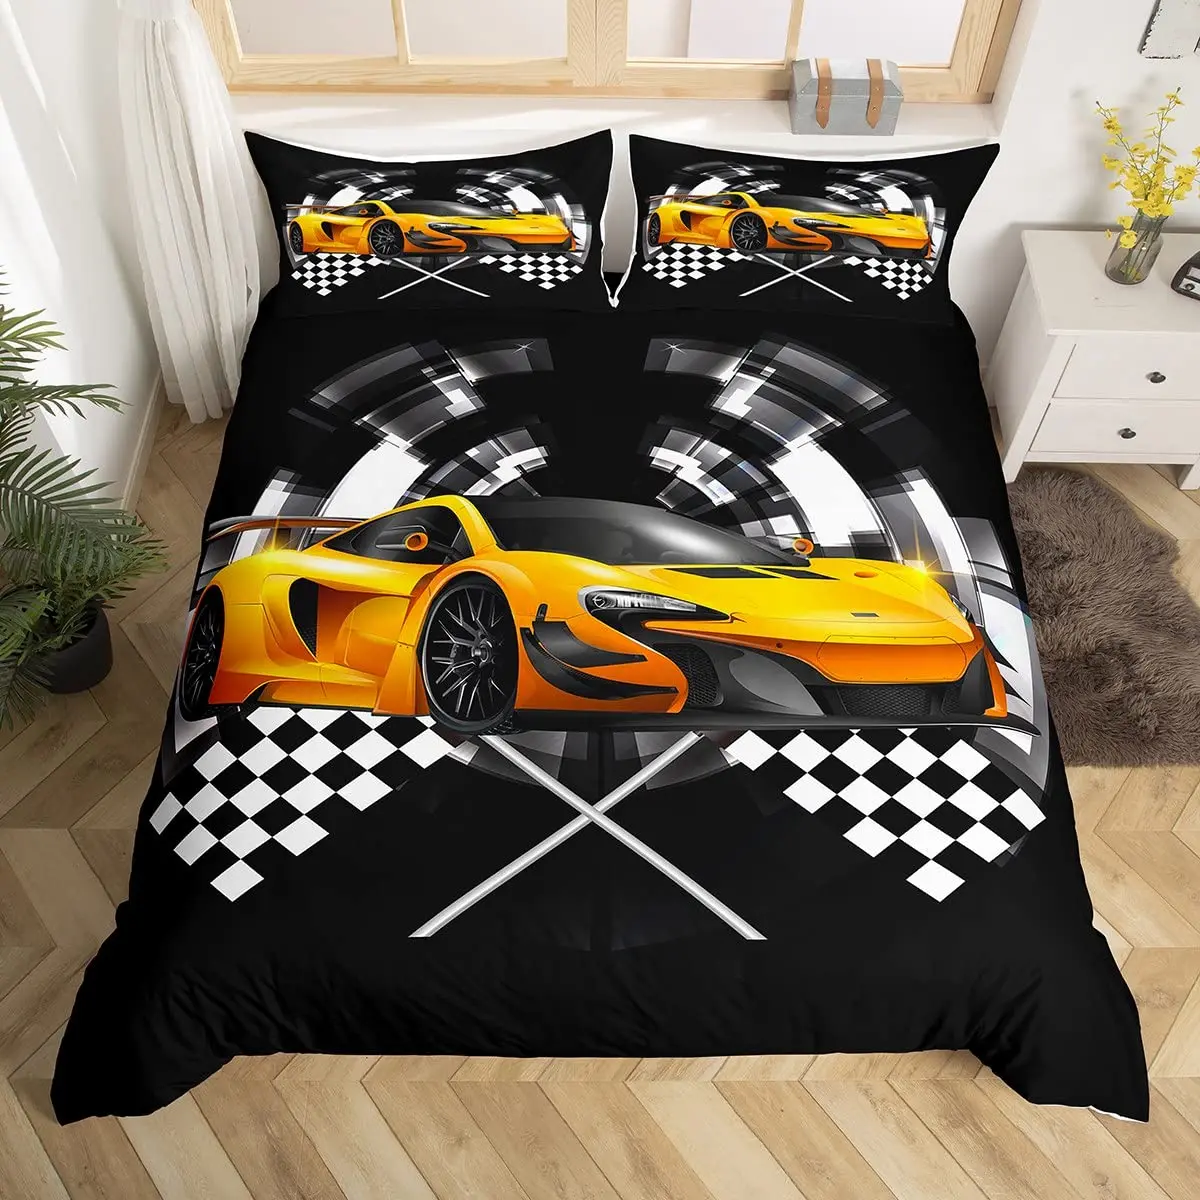 Race Car Duvet Cover for Kids Boys Teen Men Cool Speed Racing Car Automobile Print Sports Game Theme Duvet Cover with Pillowcase